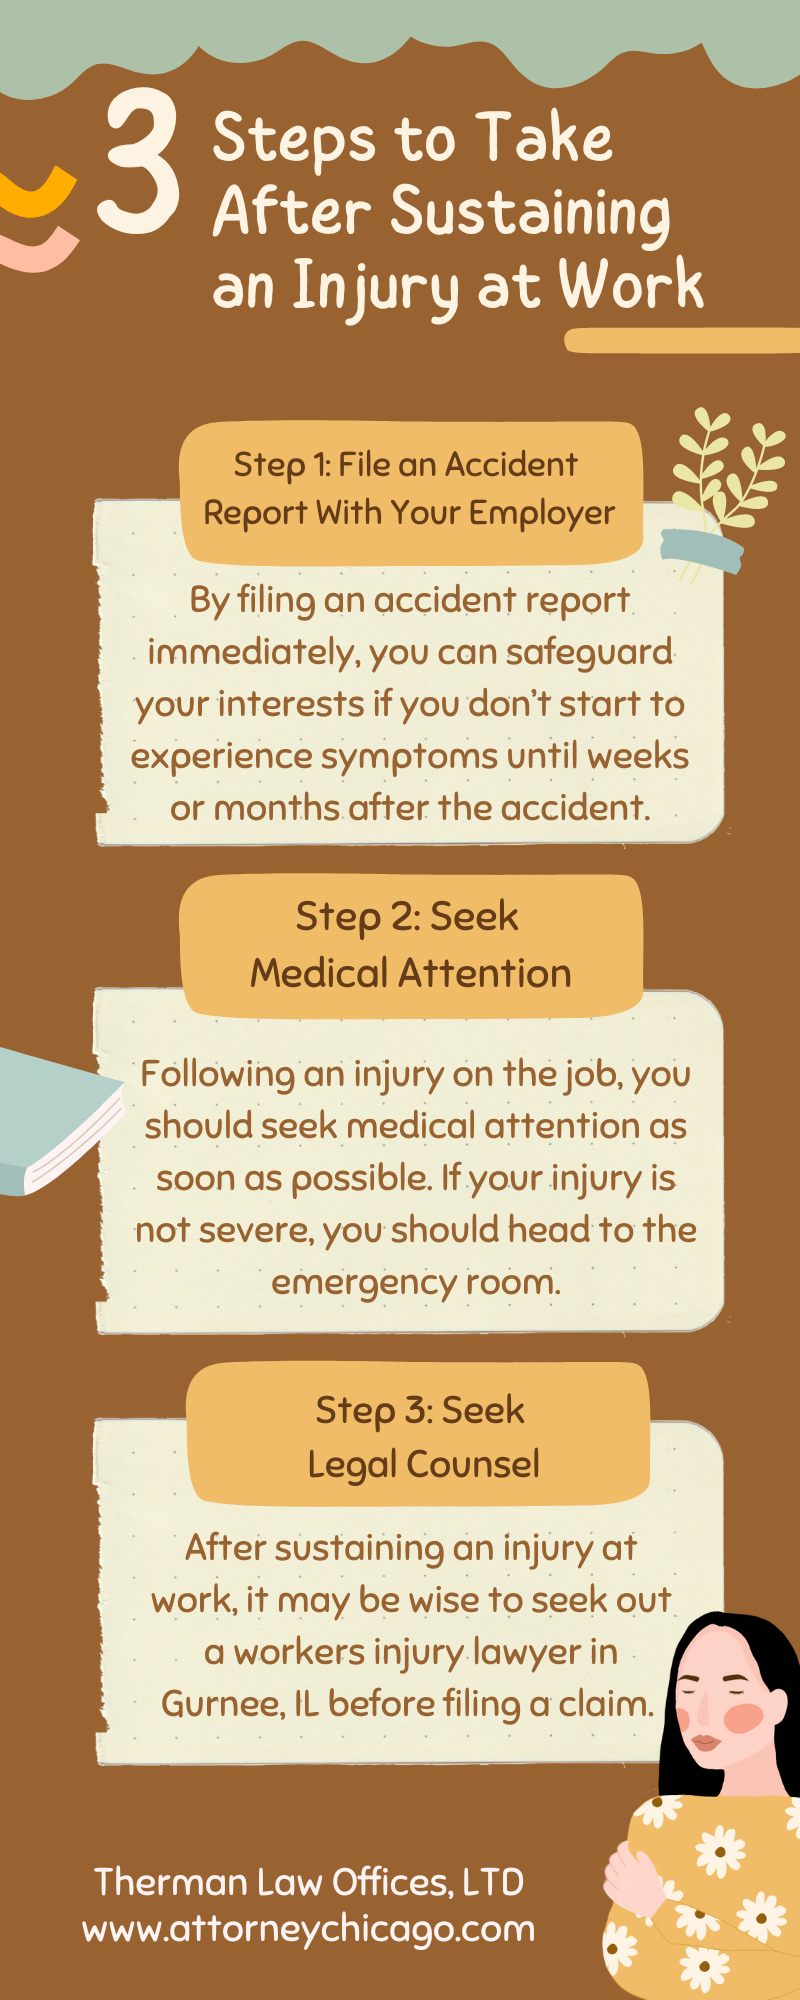 Gurnee Workers Injury Lawyer Infographic